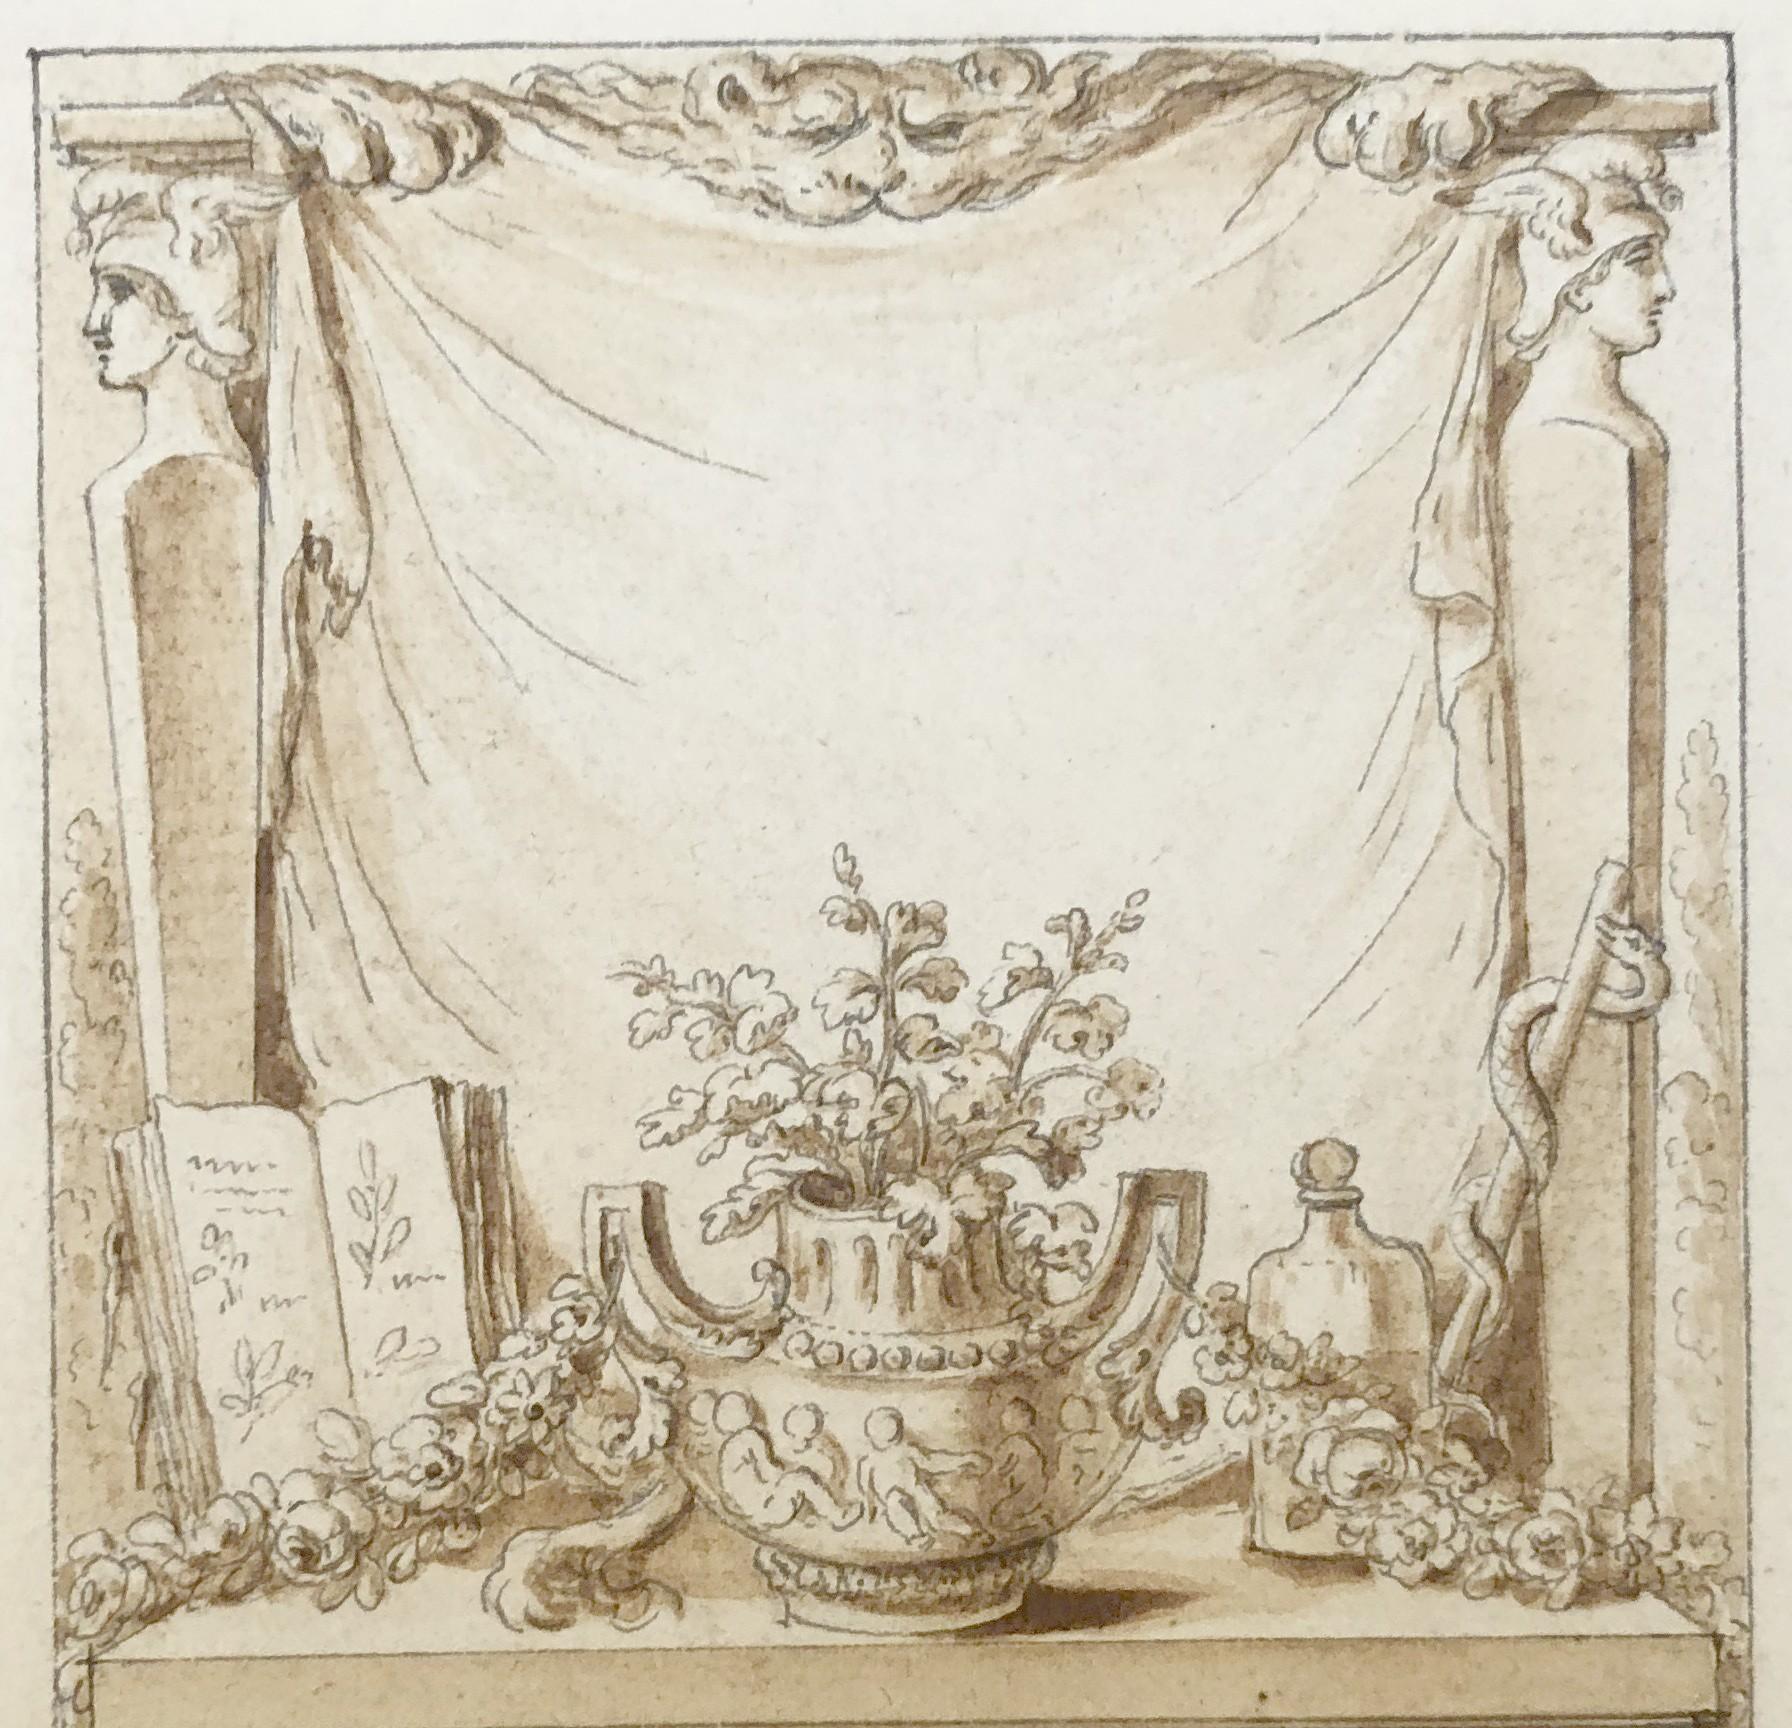 18th century French Neo Classical school, Study for frontispiece, drawing - Old Masters Art by Unknown